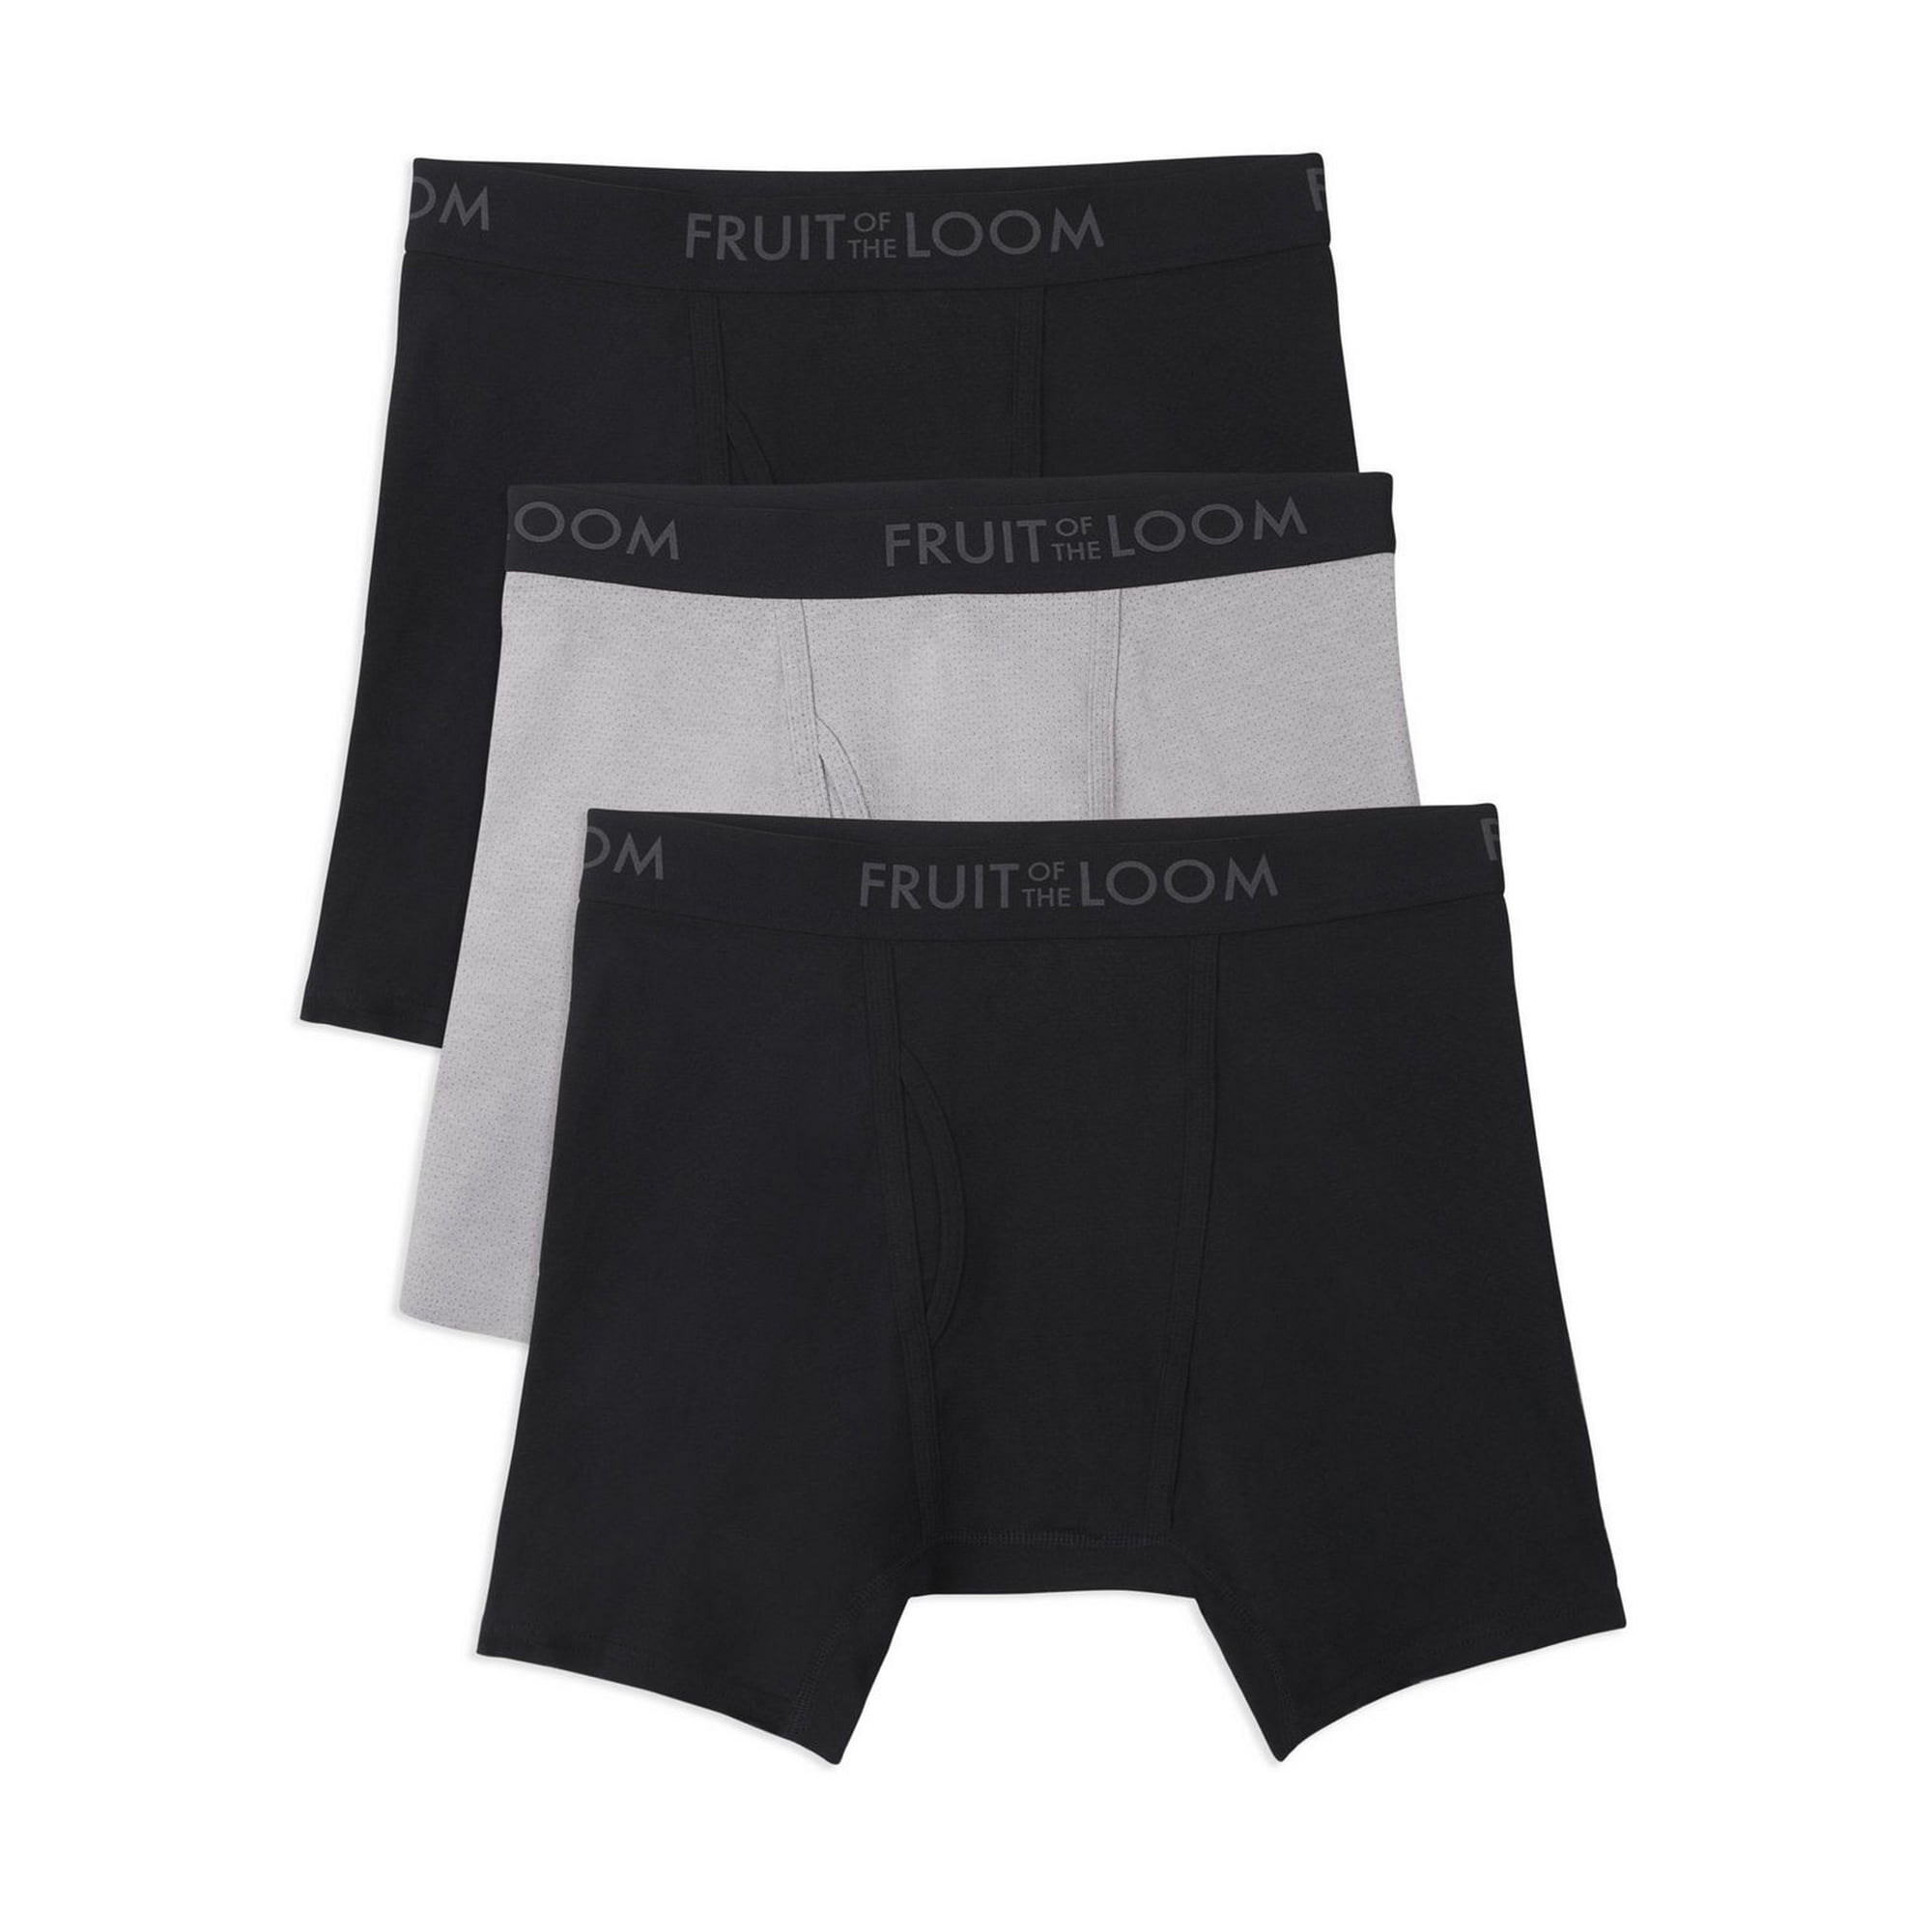 Fruit of the Loom Men's Breathable Boxer Brief, 3-pack 